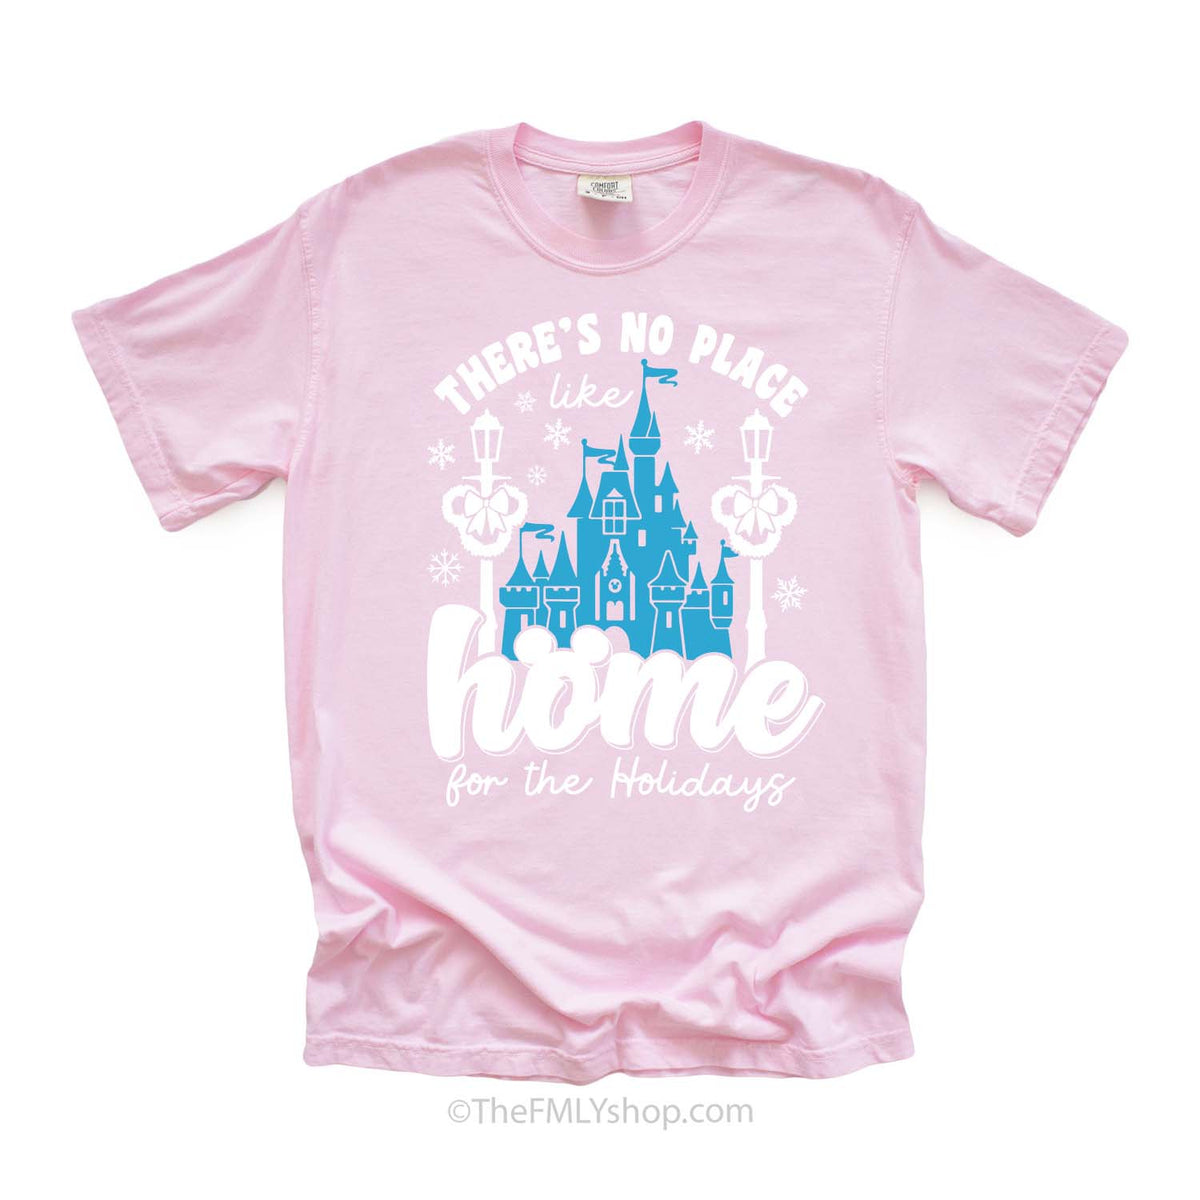 There's No Place Like Home for the Holidays Christmas Tee